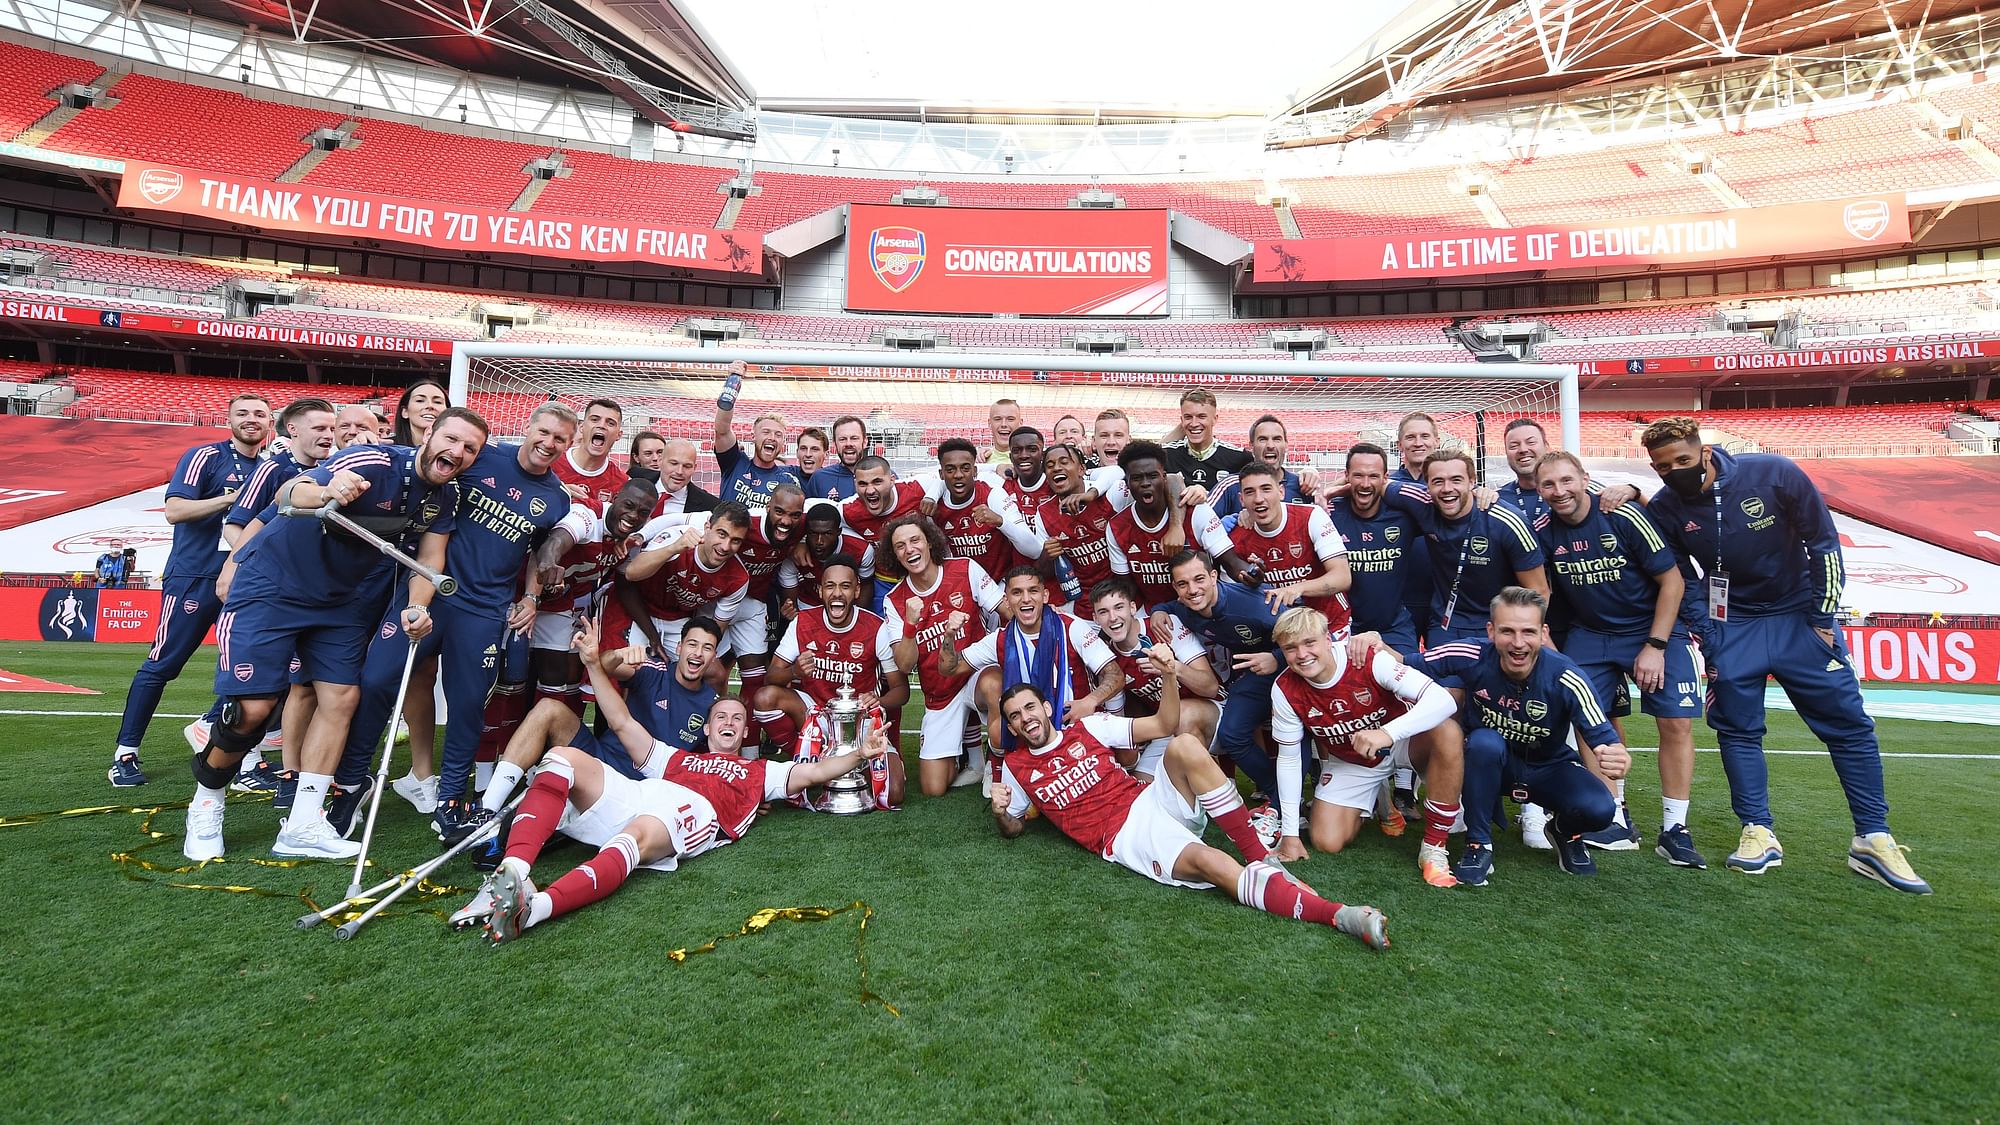 Arsenal won a record 14th FA Cup title after beating Chelsea 2-1 in the final at the Wembley Stadium.